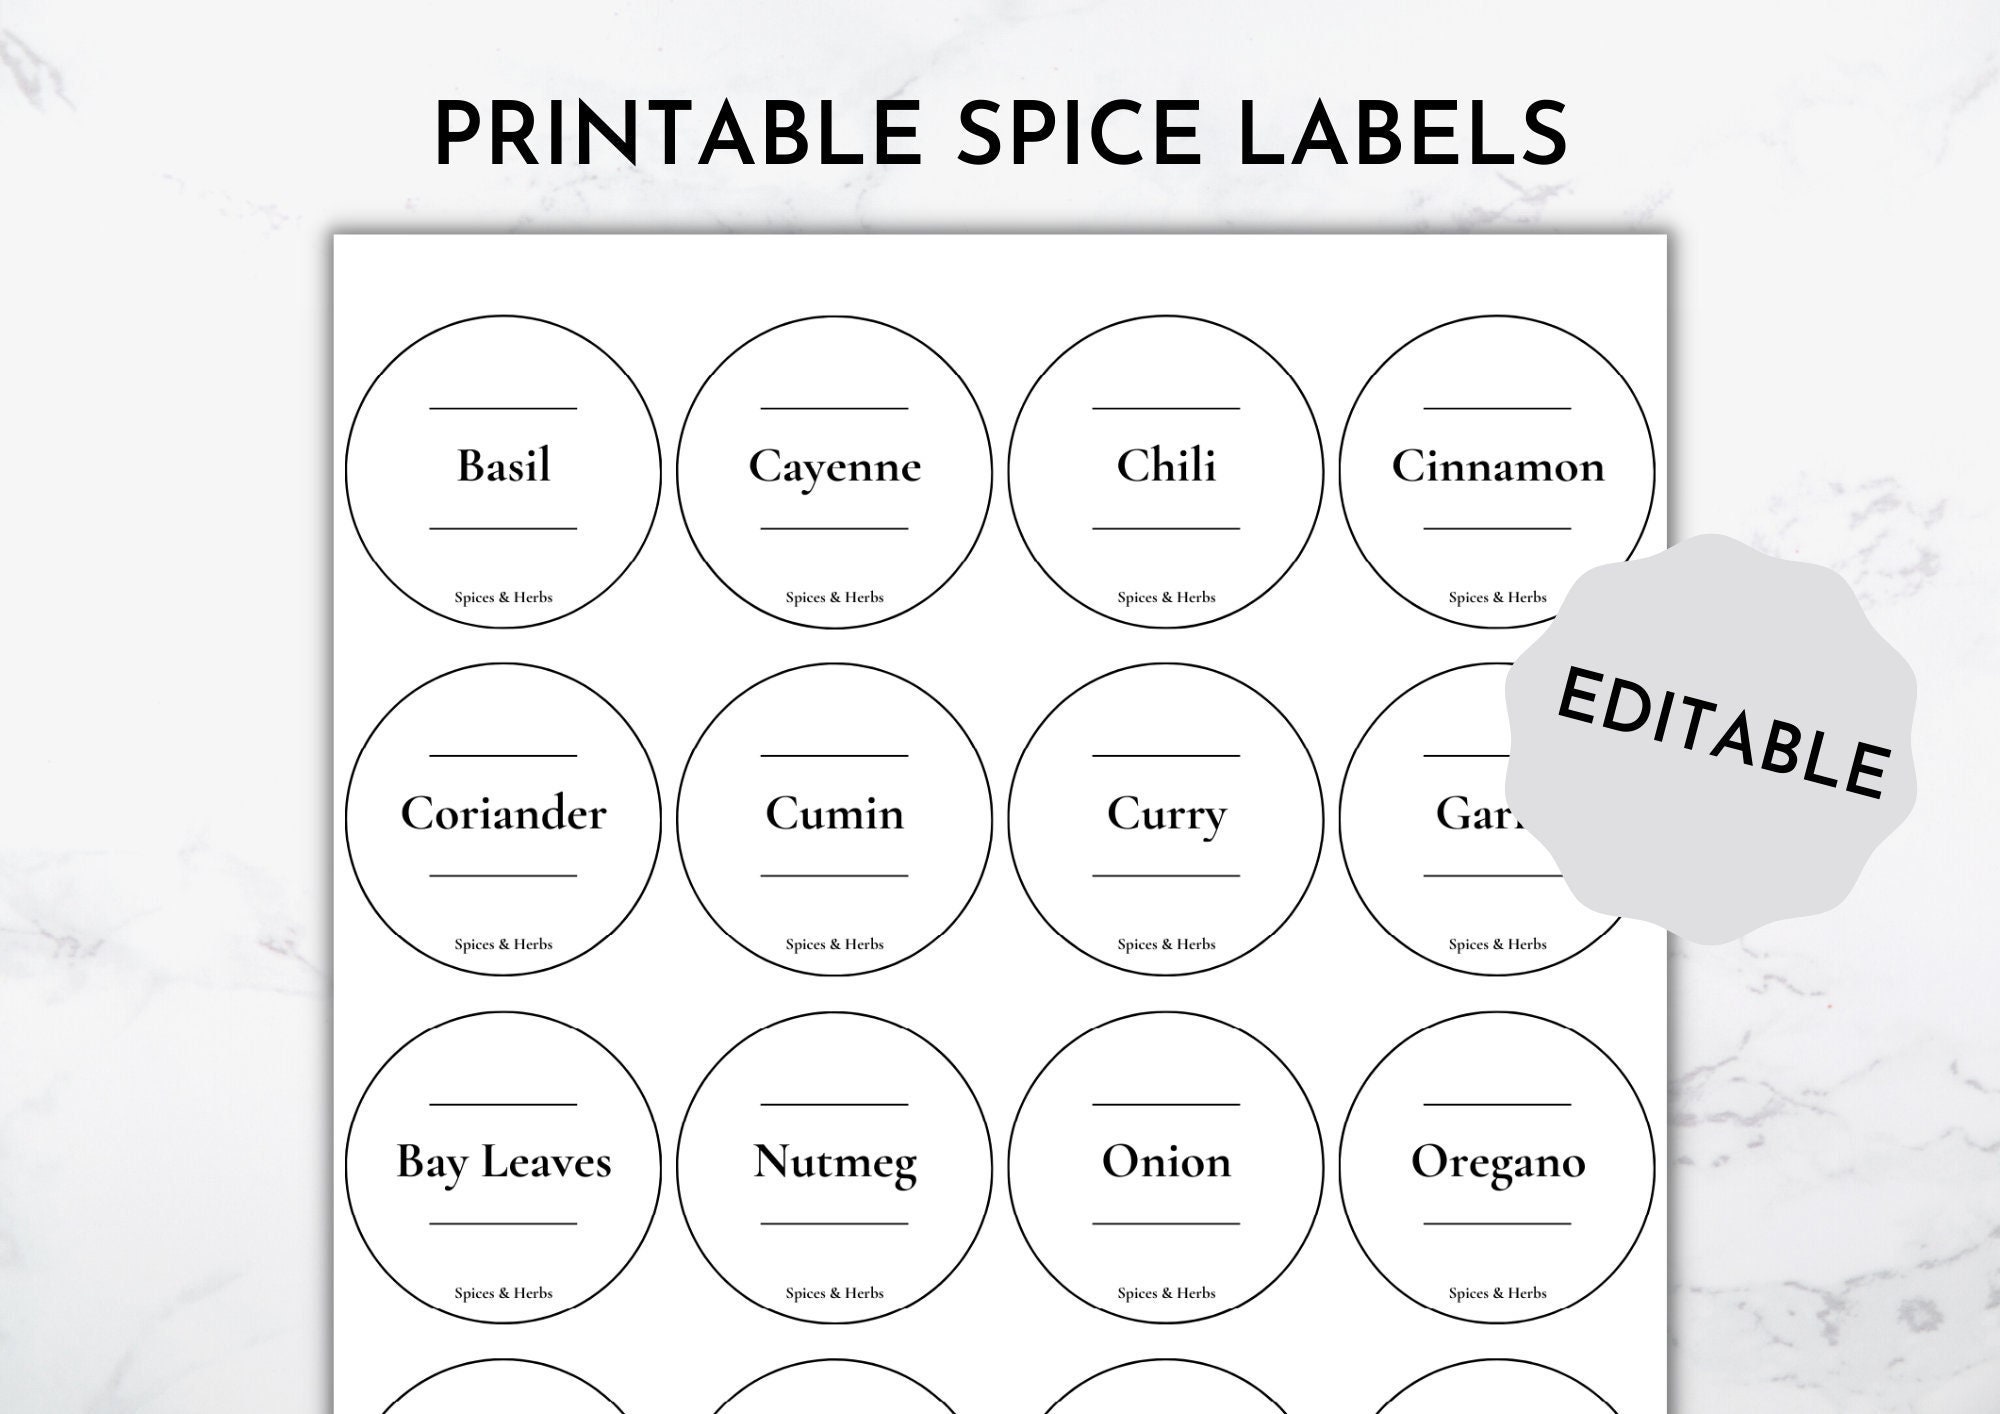 Free Printable Farmhouse Herb and Spice Labels - The Cottage Market